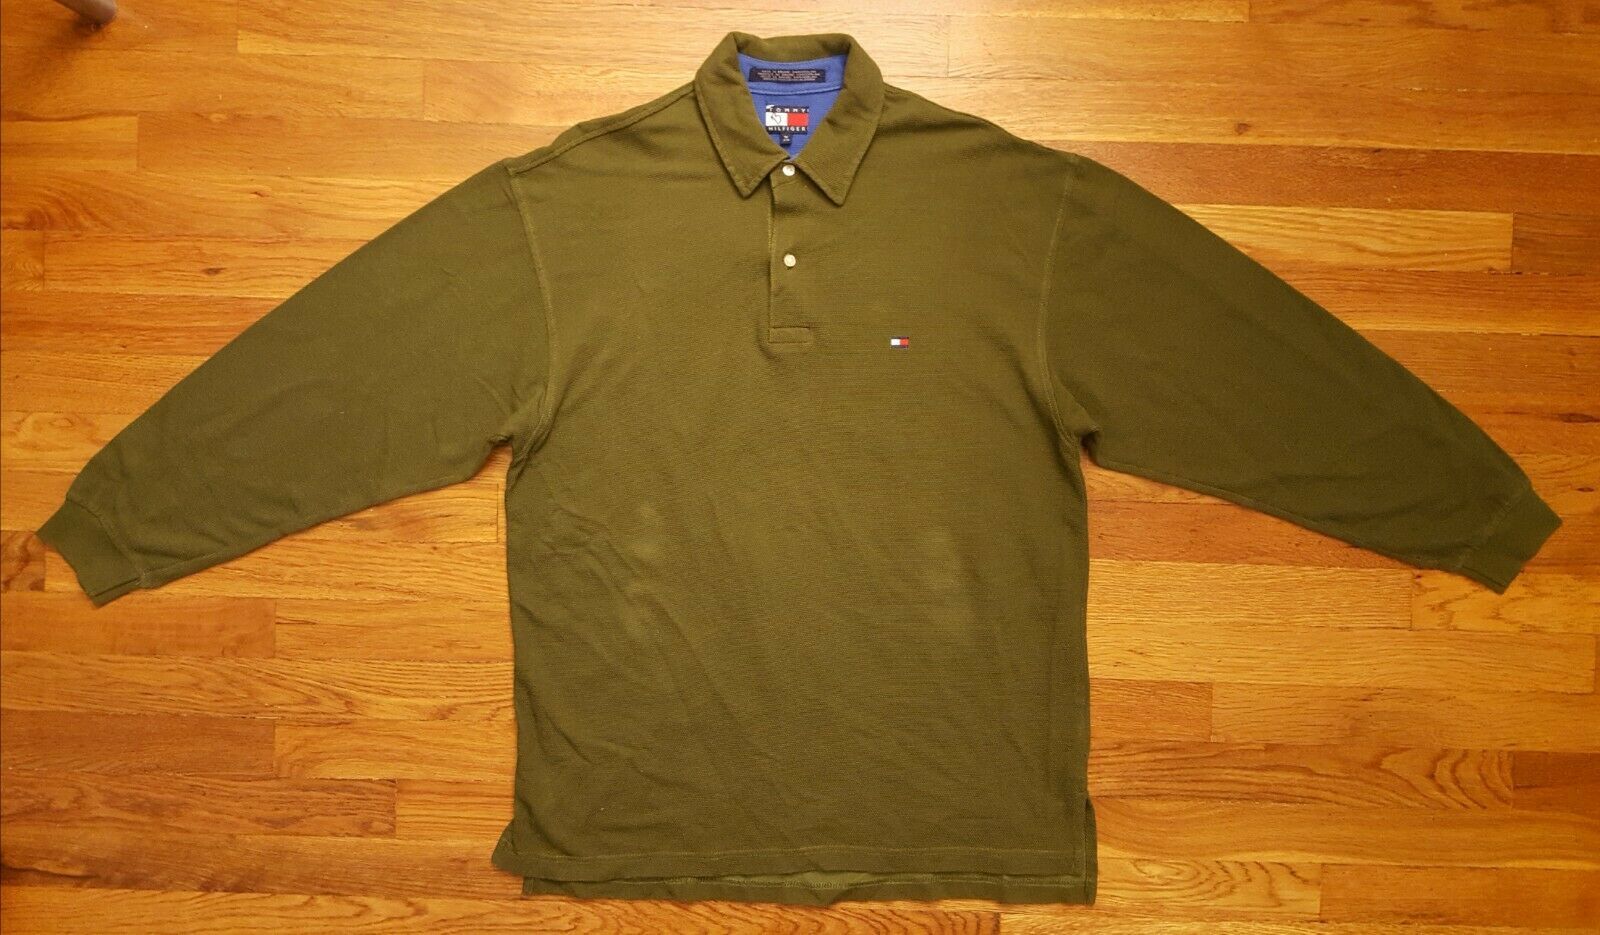 Primary image for Tommy Hilfiger Dark Army Olive Green Long Sleeve Button Polo Shirt Medium M